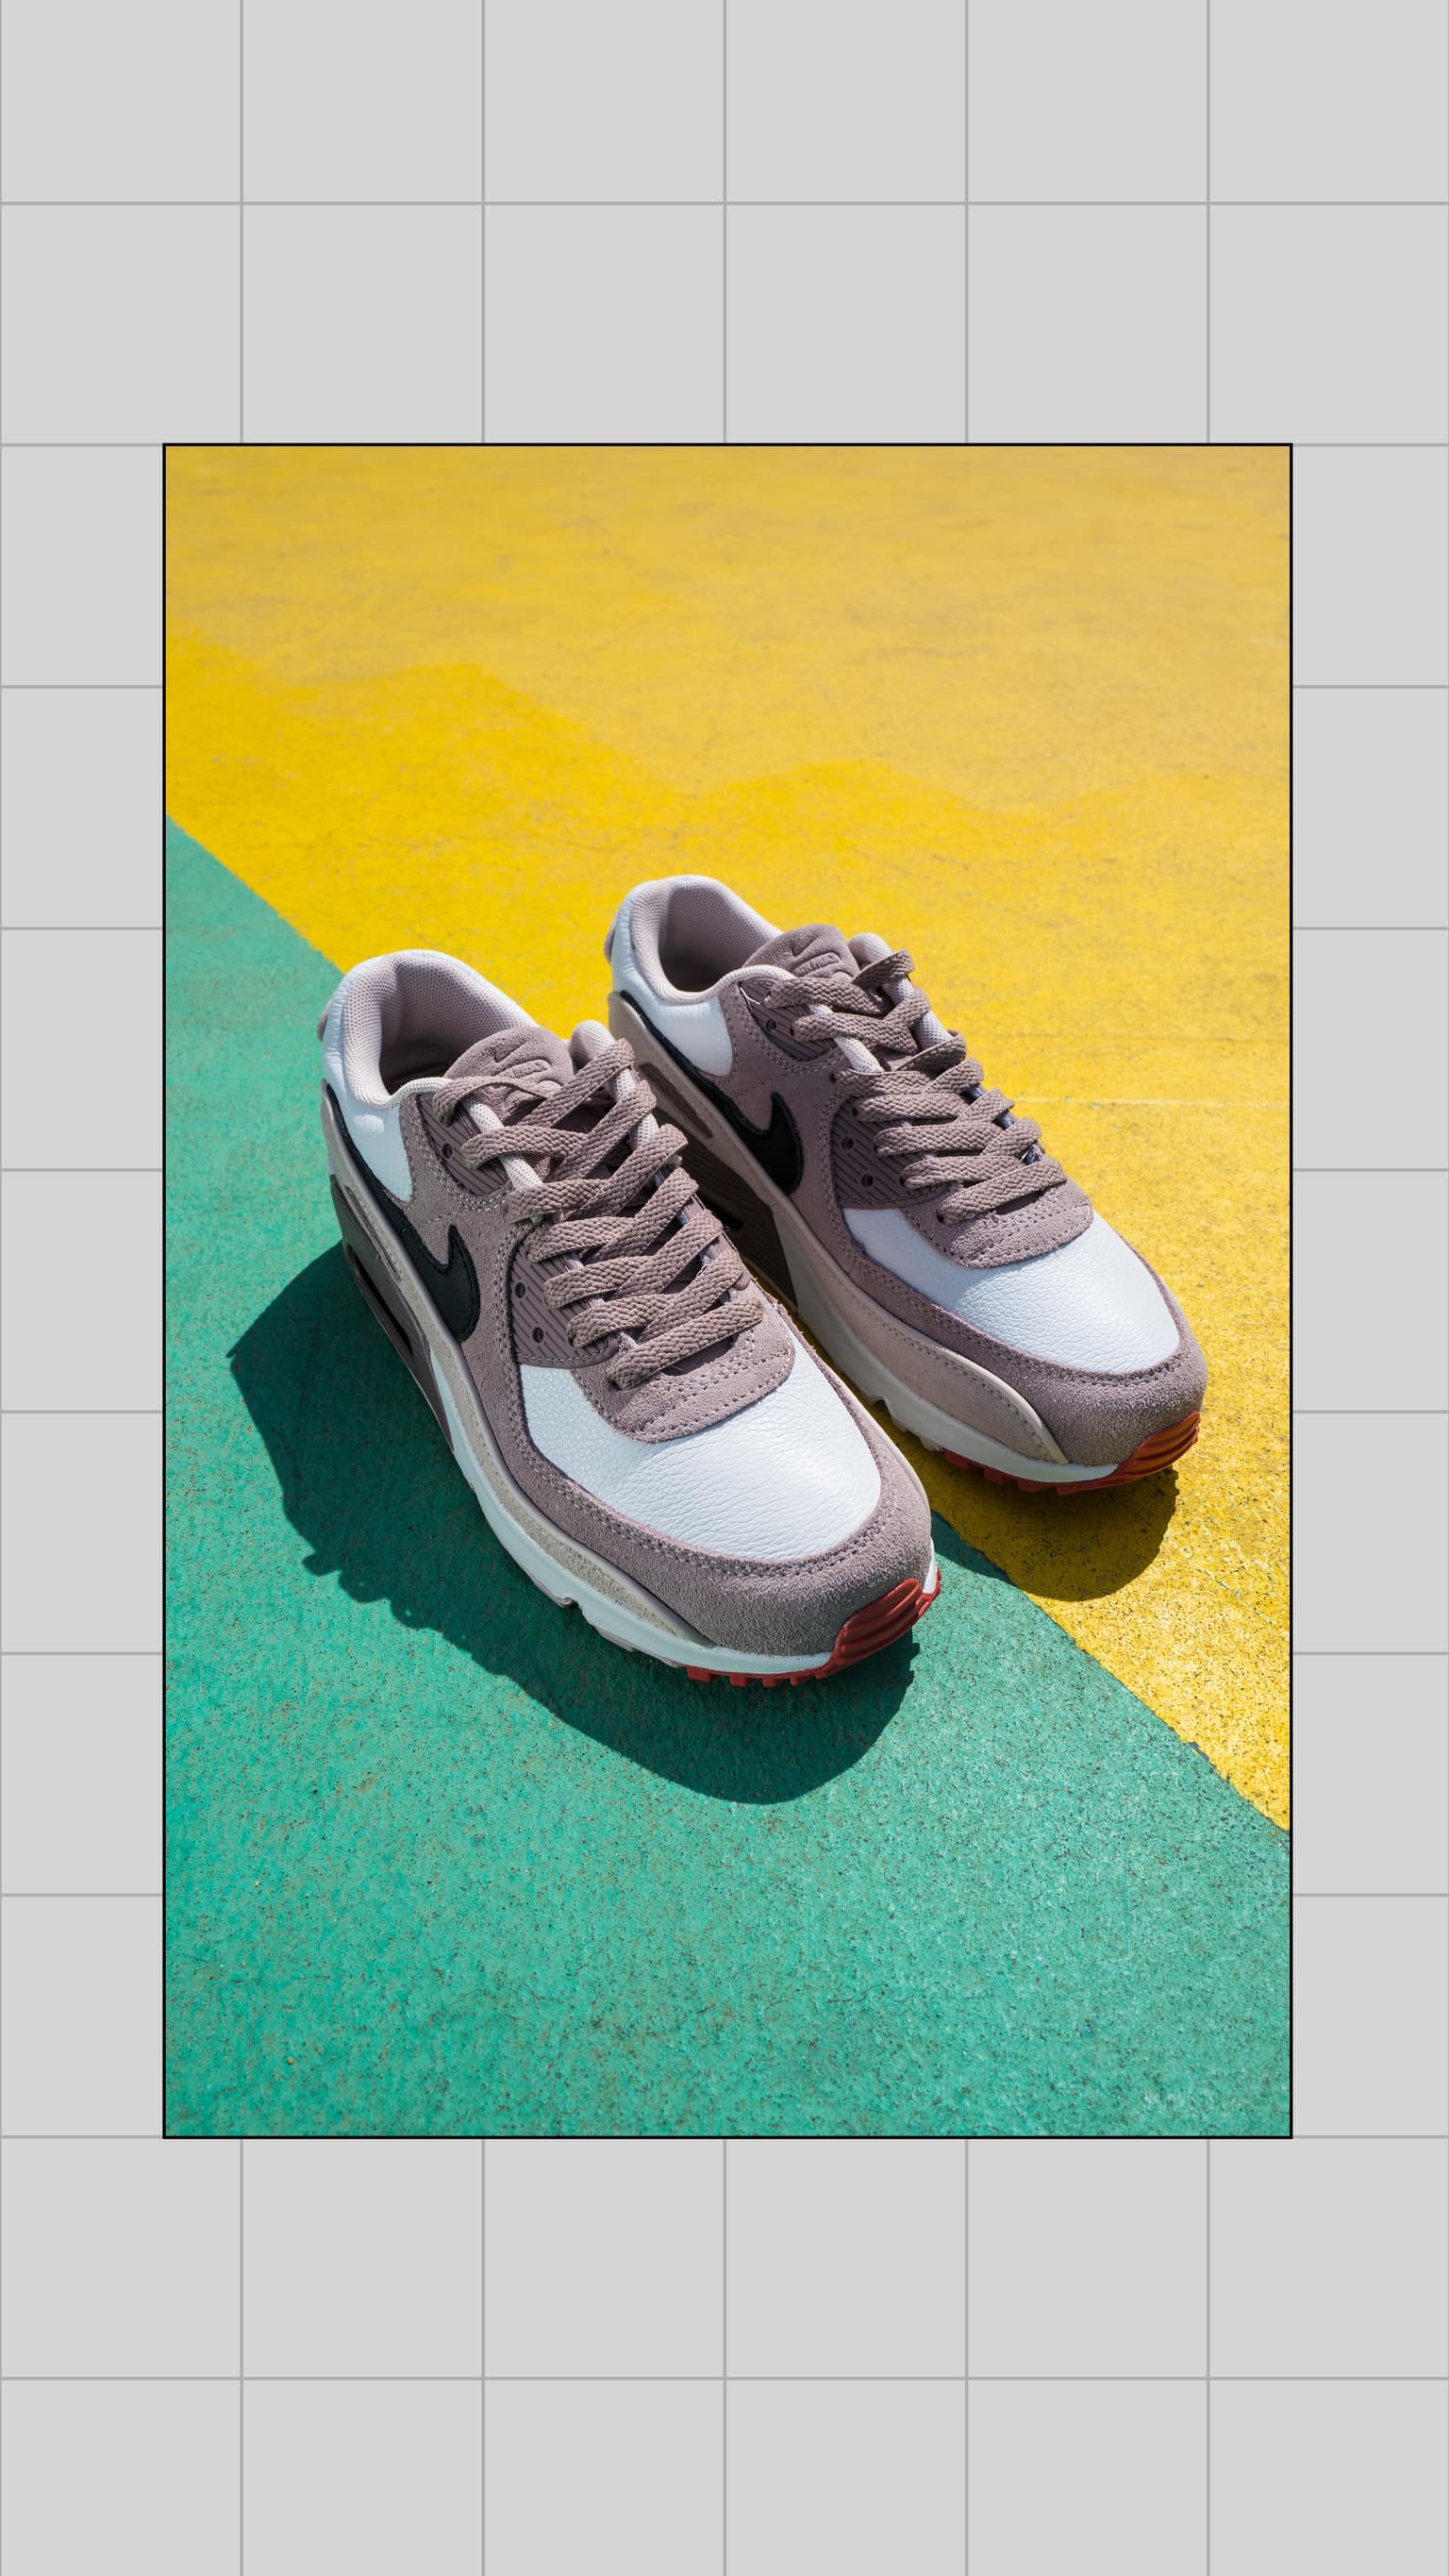 Behind the Design - Air Max 90 by HvA